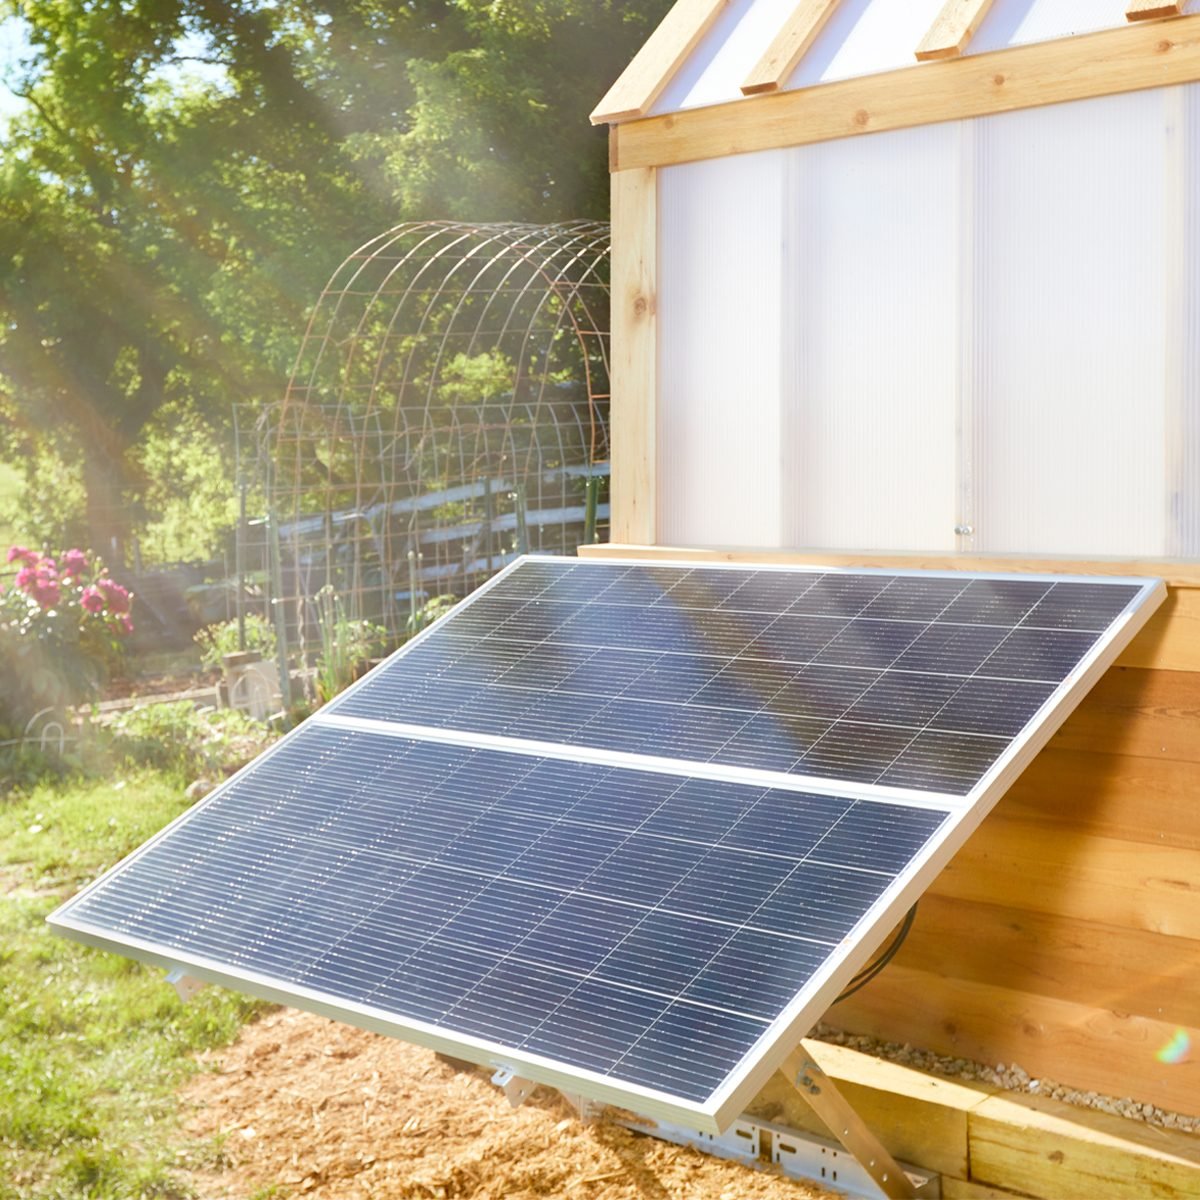 Build-It-Yourself DIY Solar Generator Kit: Assemble It Yourself - Parts Only